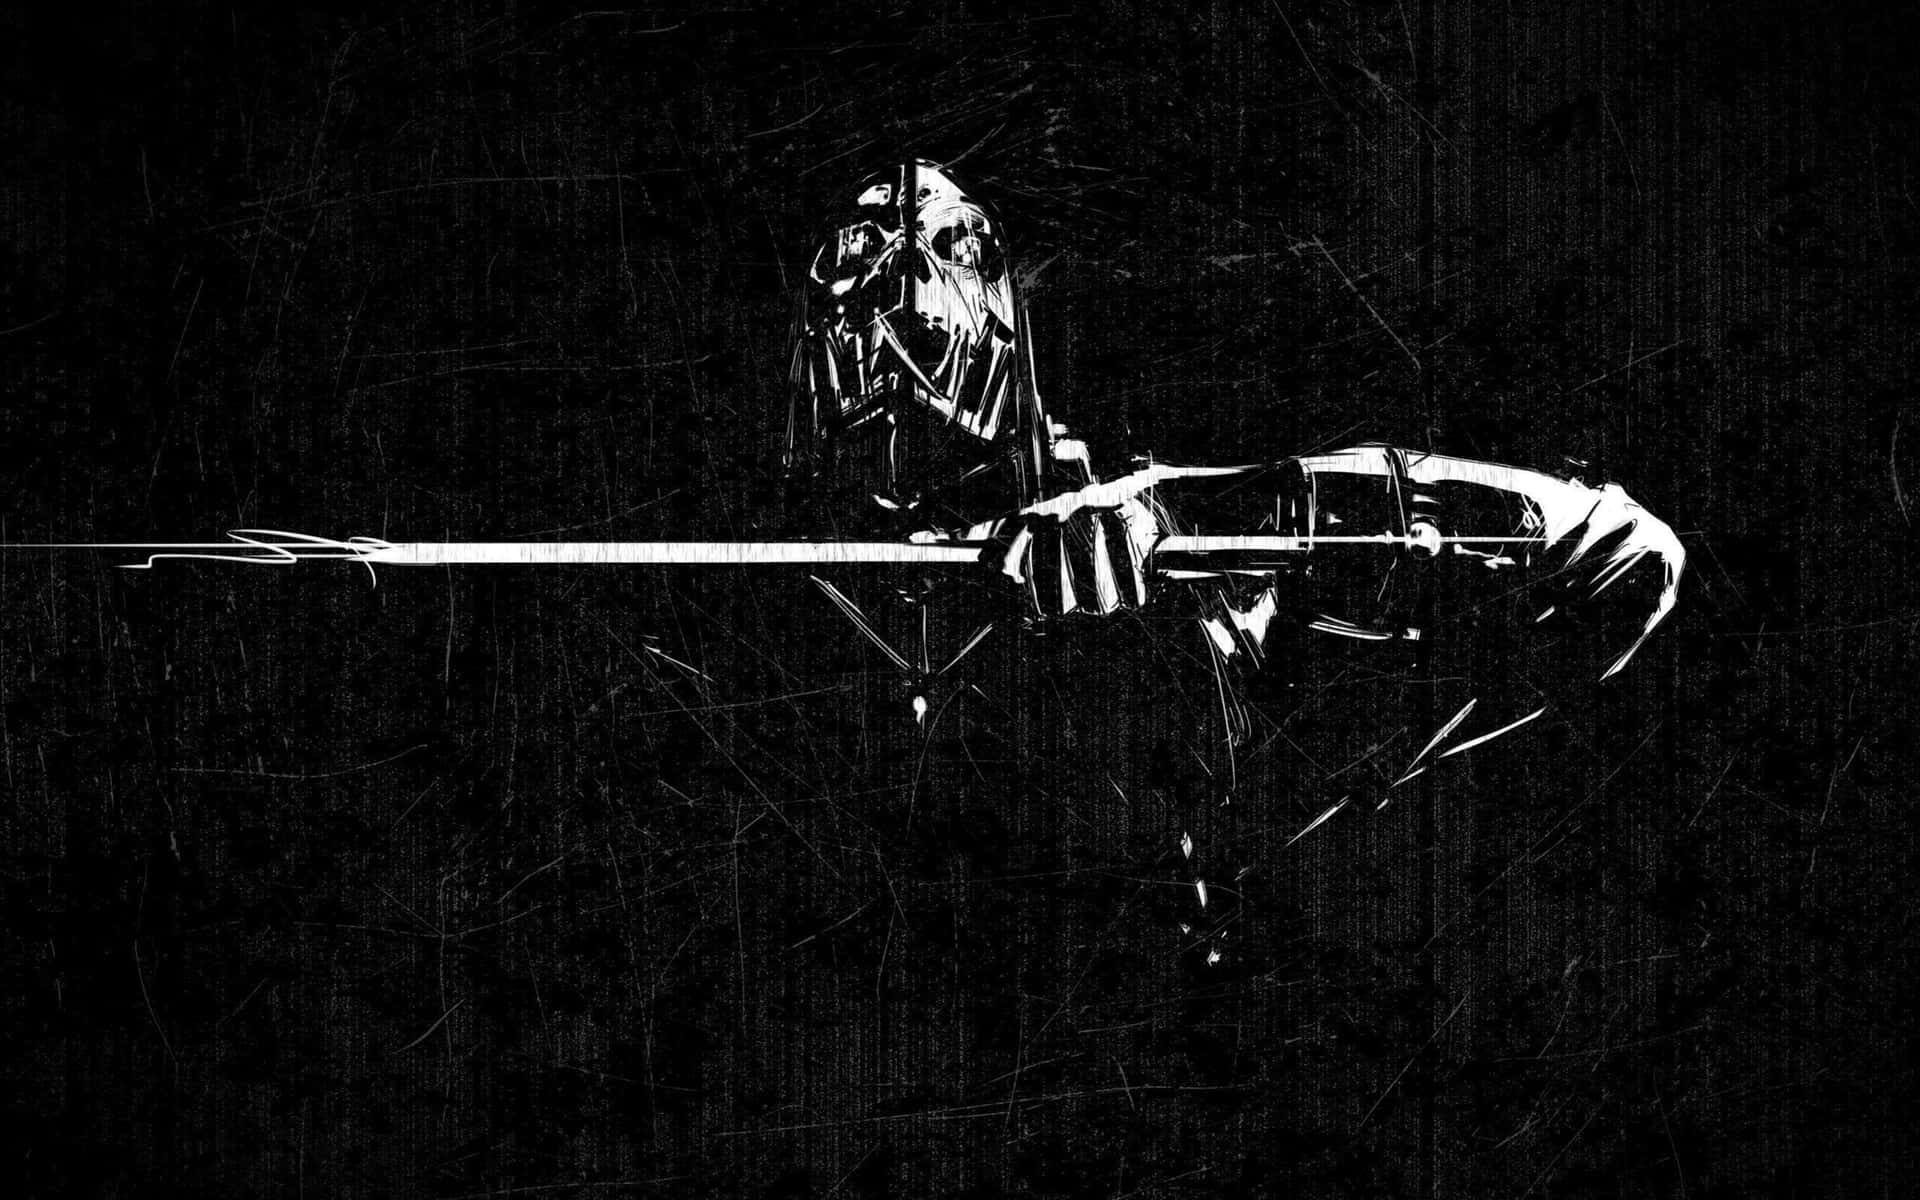 Step into a world of shadow and chaos with "4K Dishonored" Wallpaper